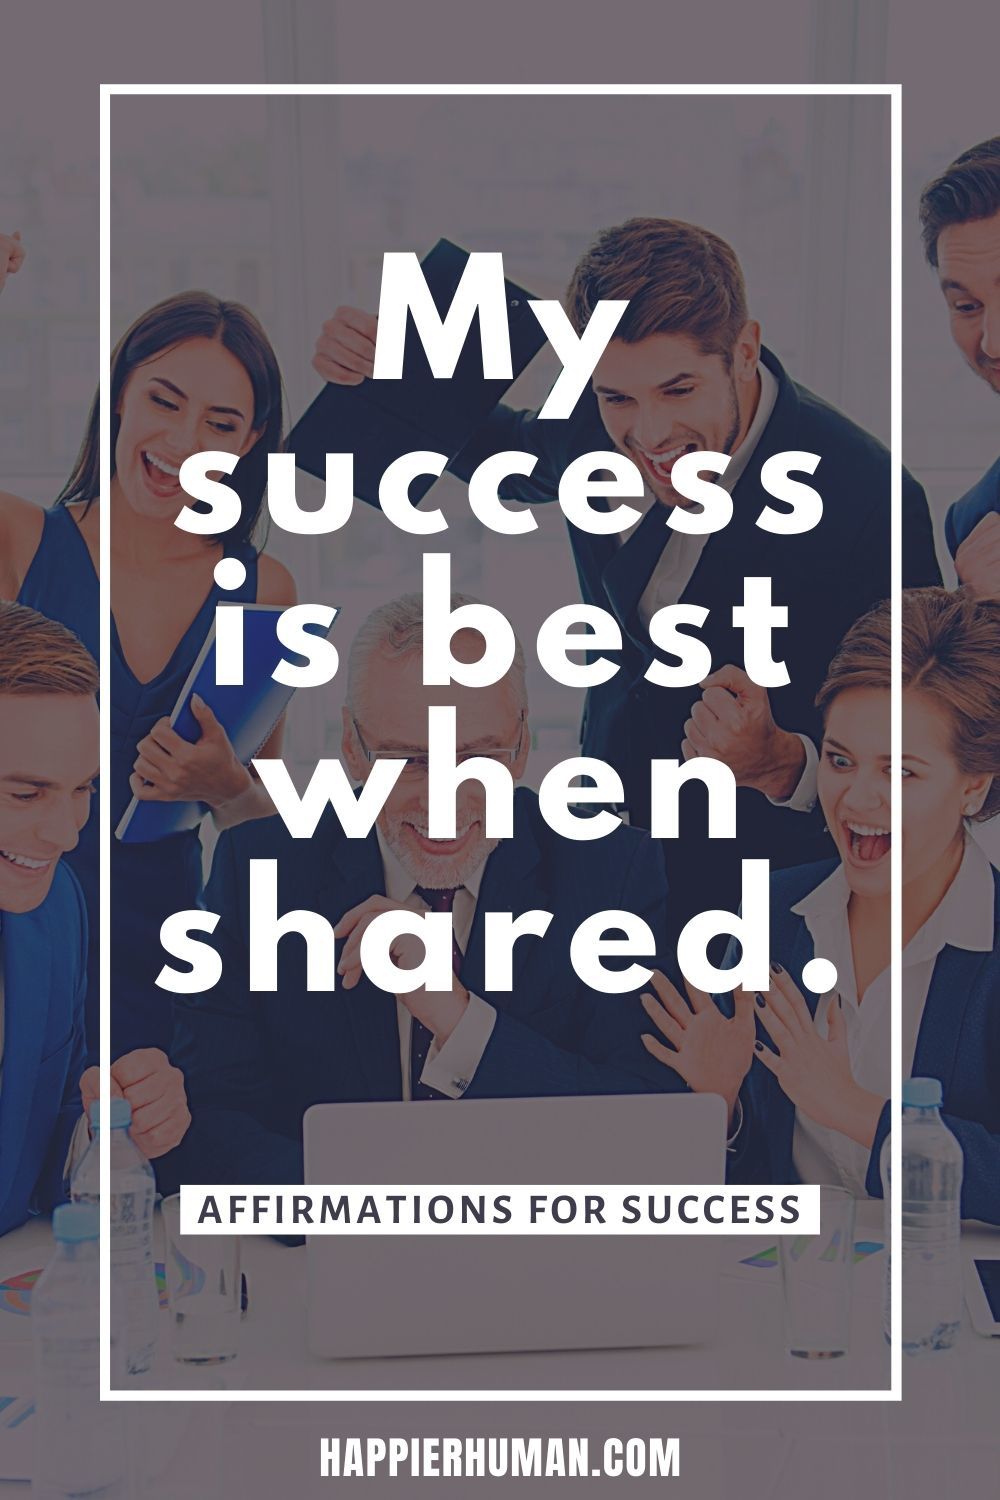 My success is best when shared. | i am affirmations for success | | affirmations for success in business